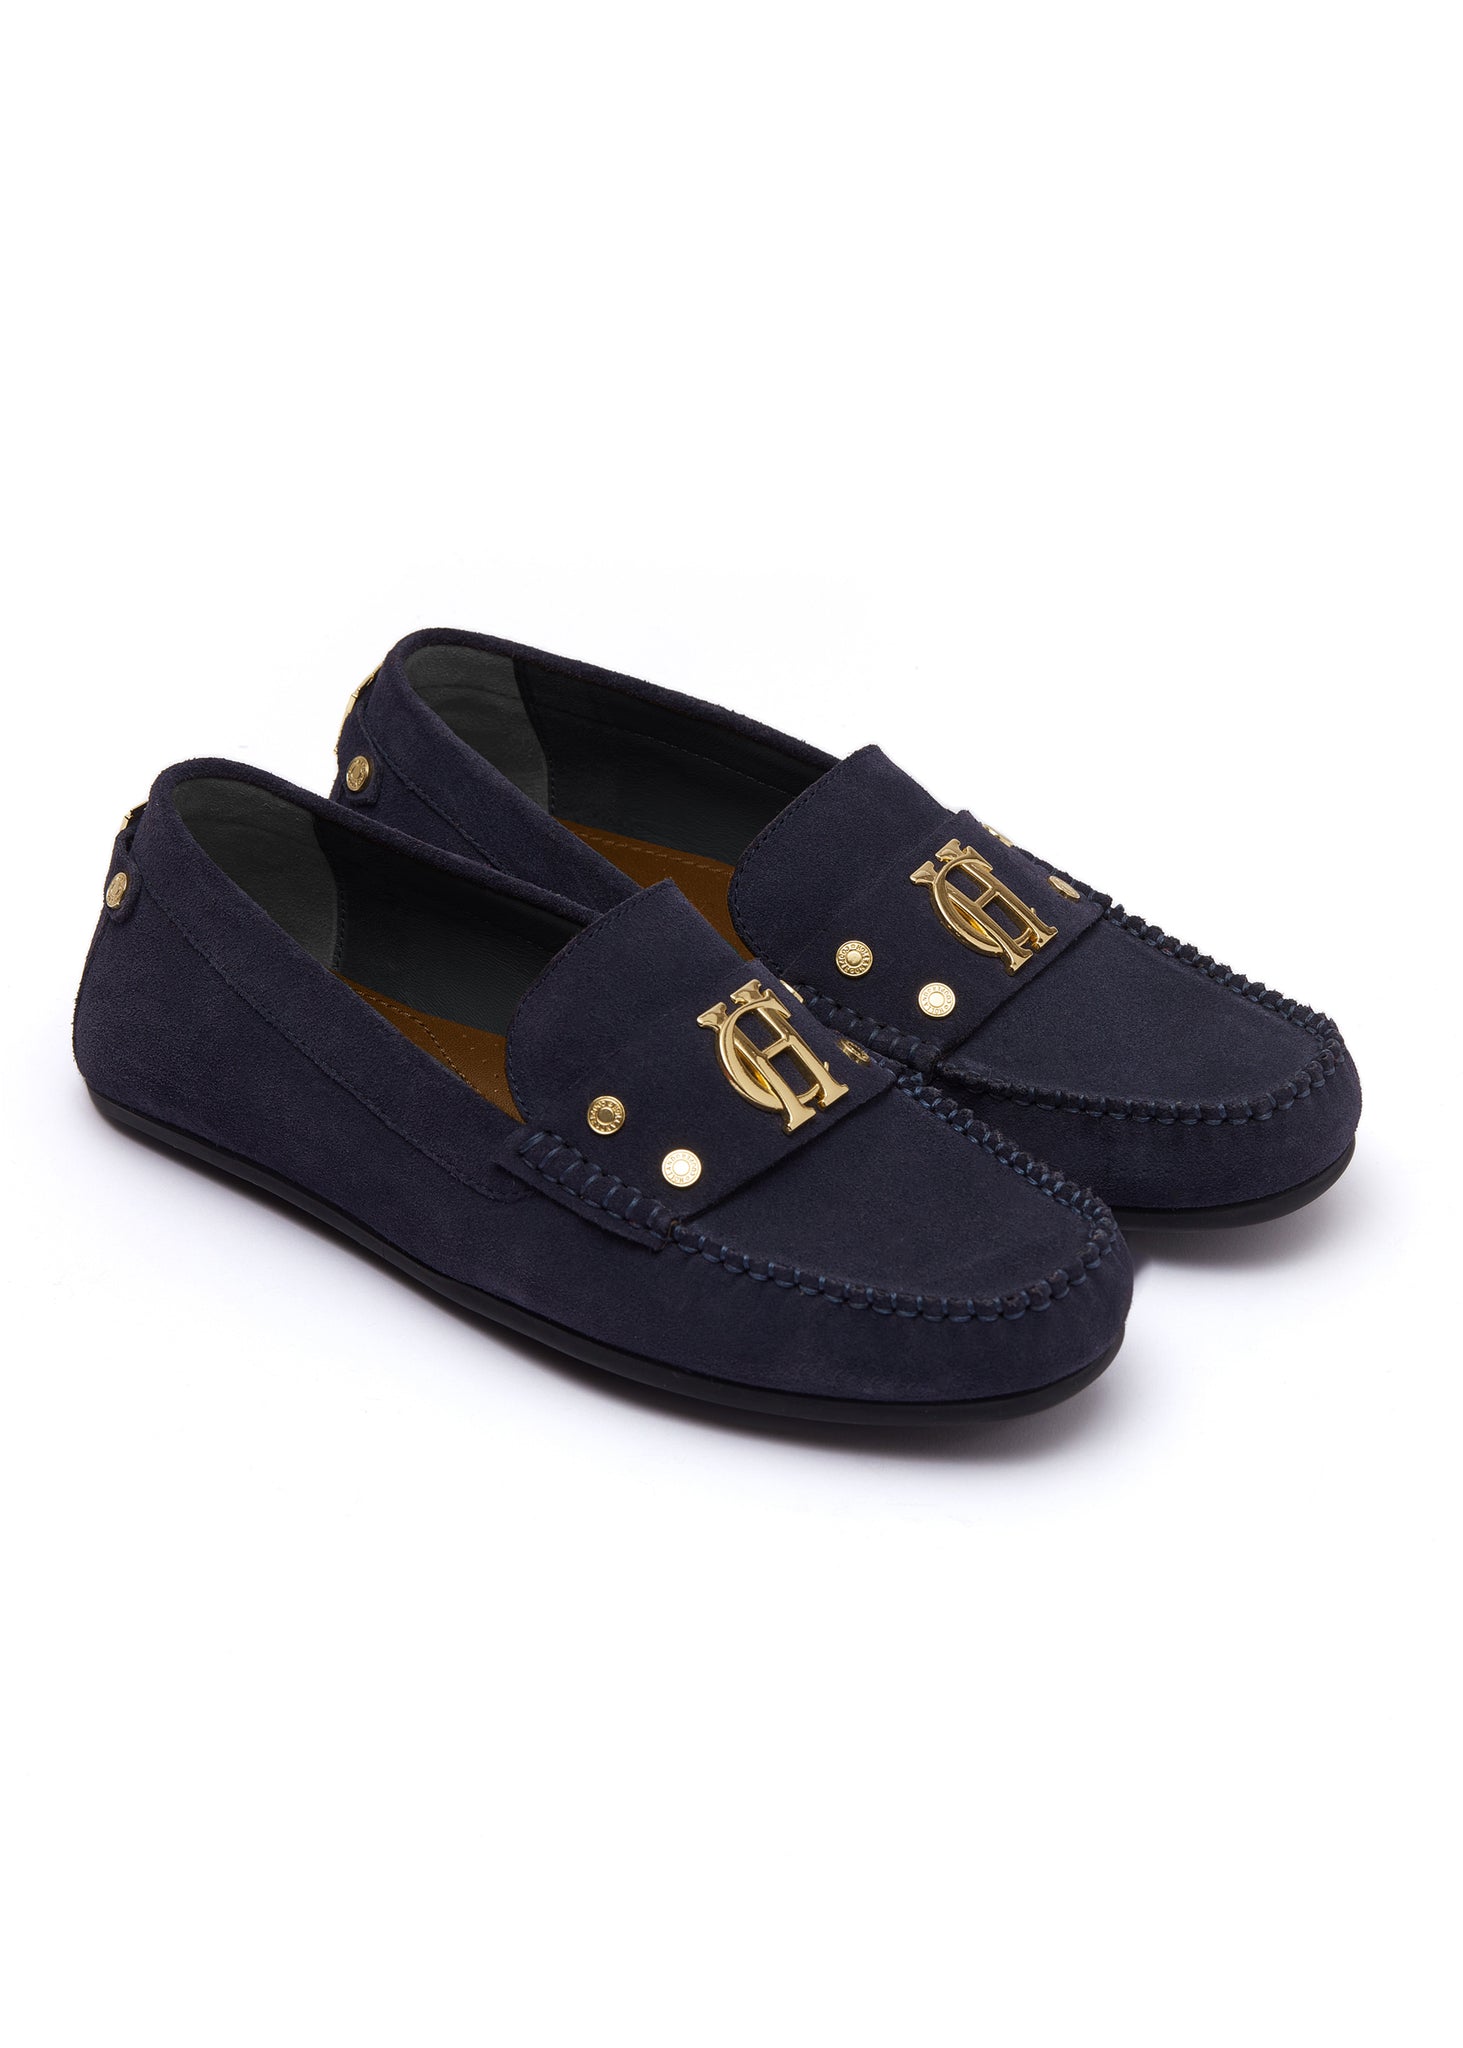 navy suede loafers with a leather sole and top stitching details and gold hardware